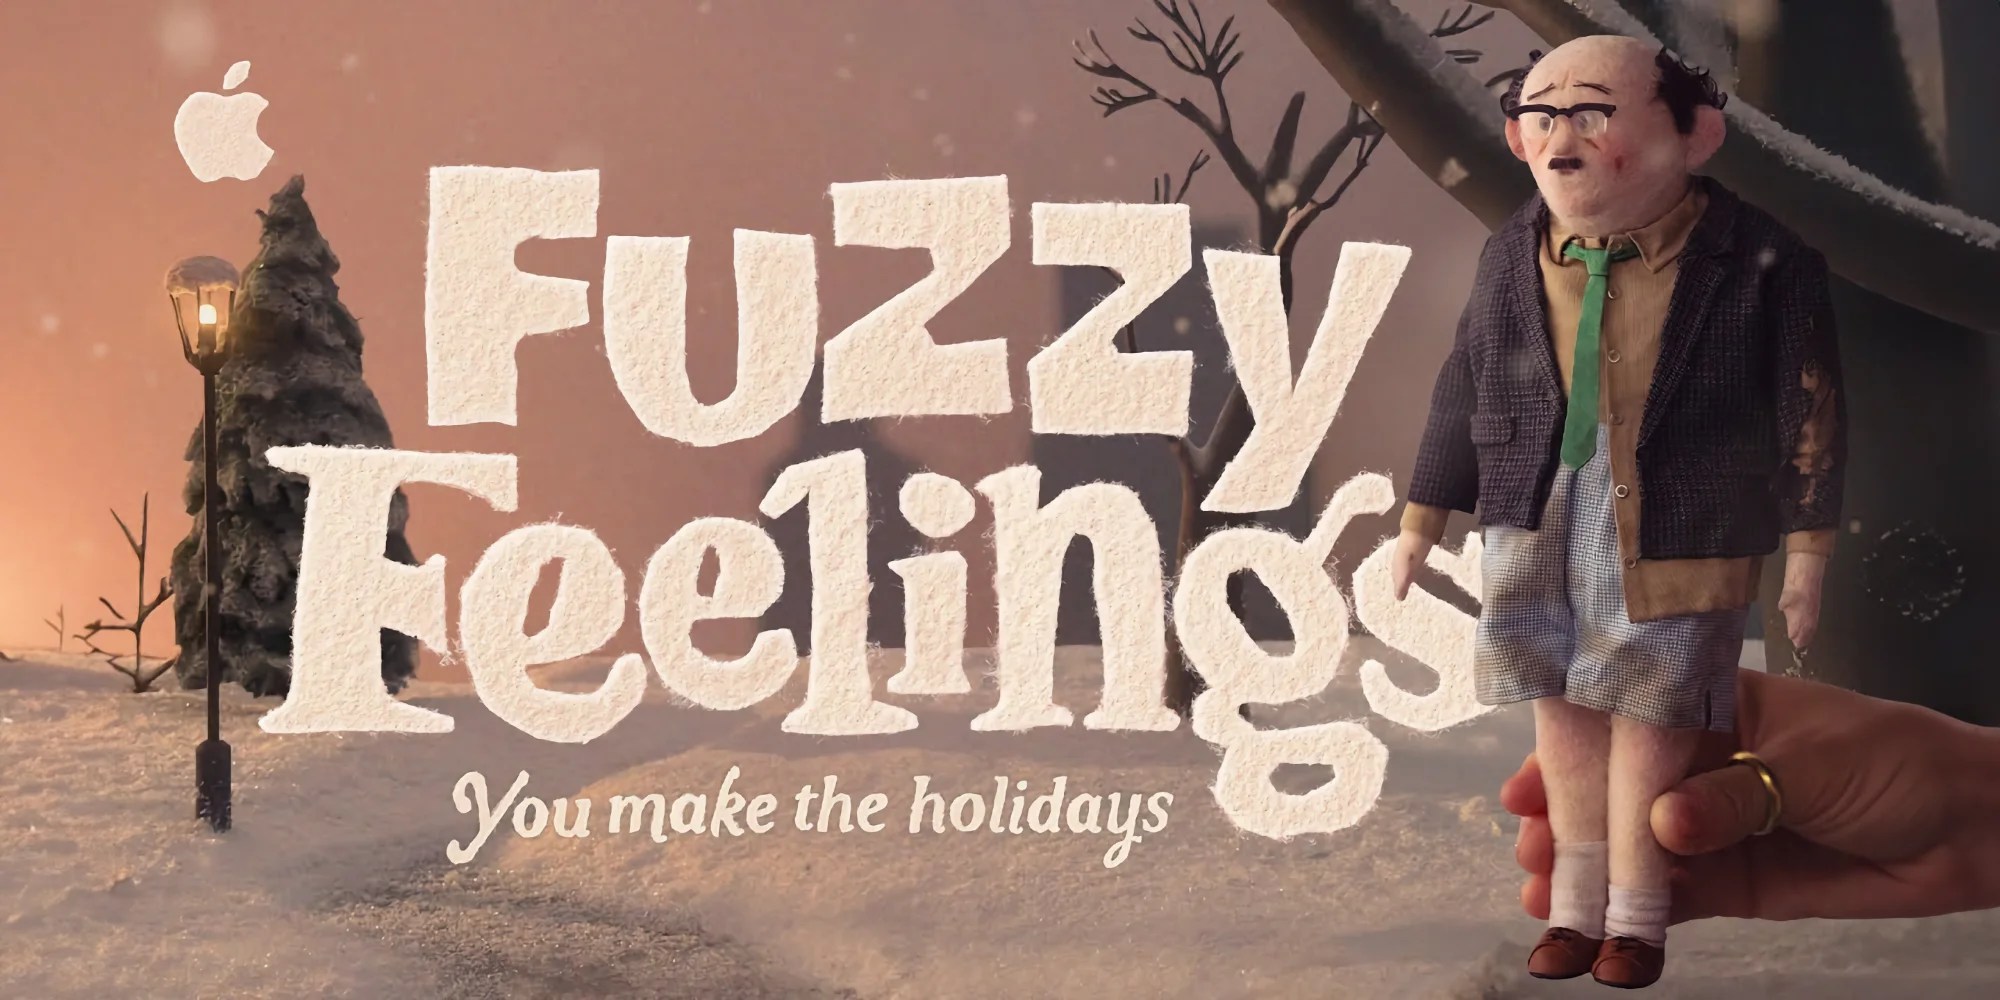 Watch Apple's annual holiday film now: 'Fuzzy Feelings' [Video]